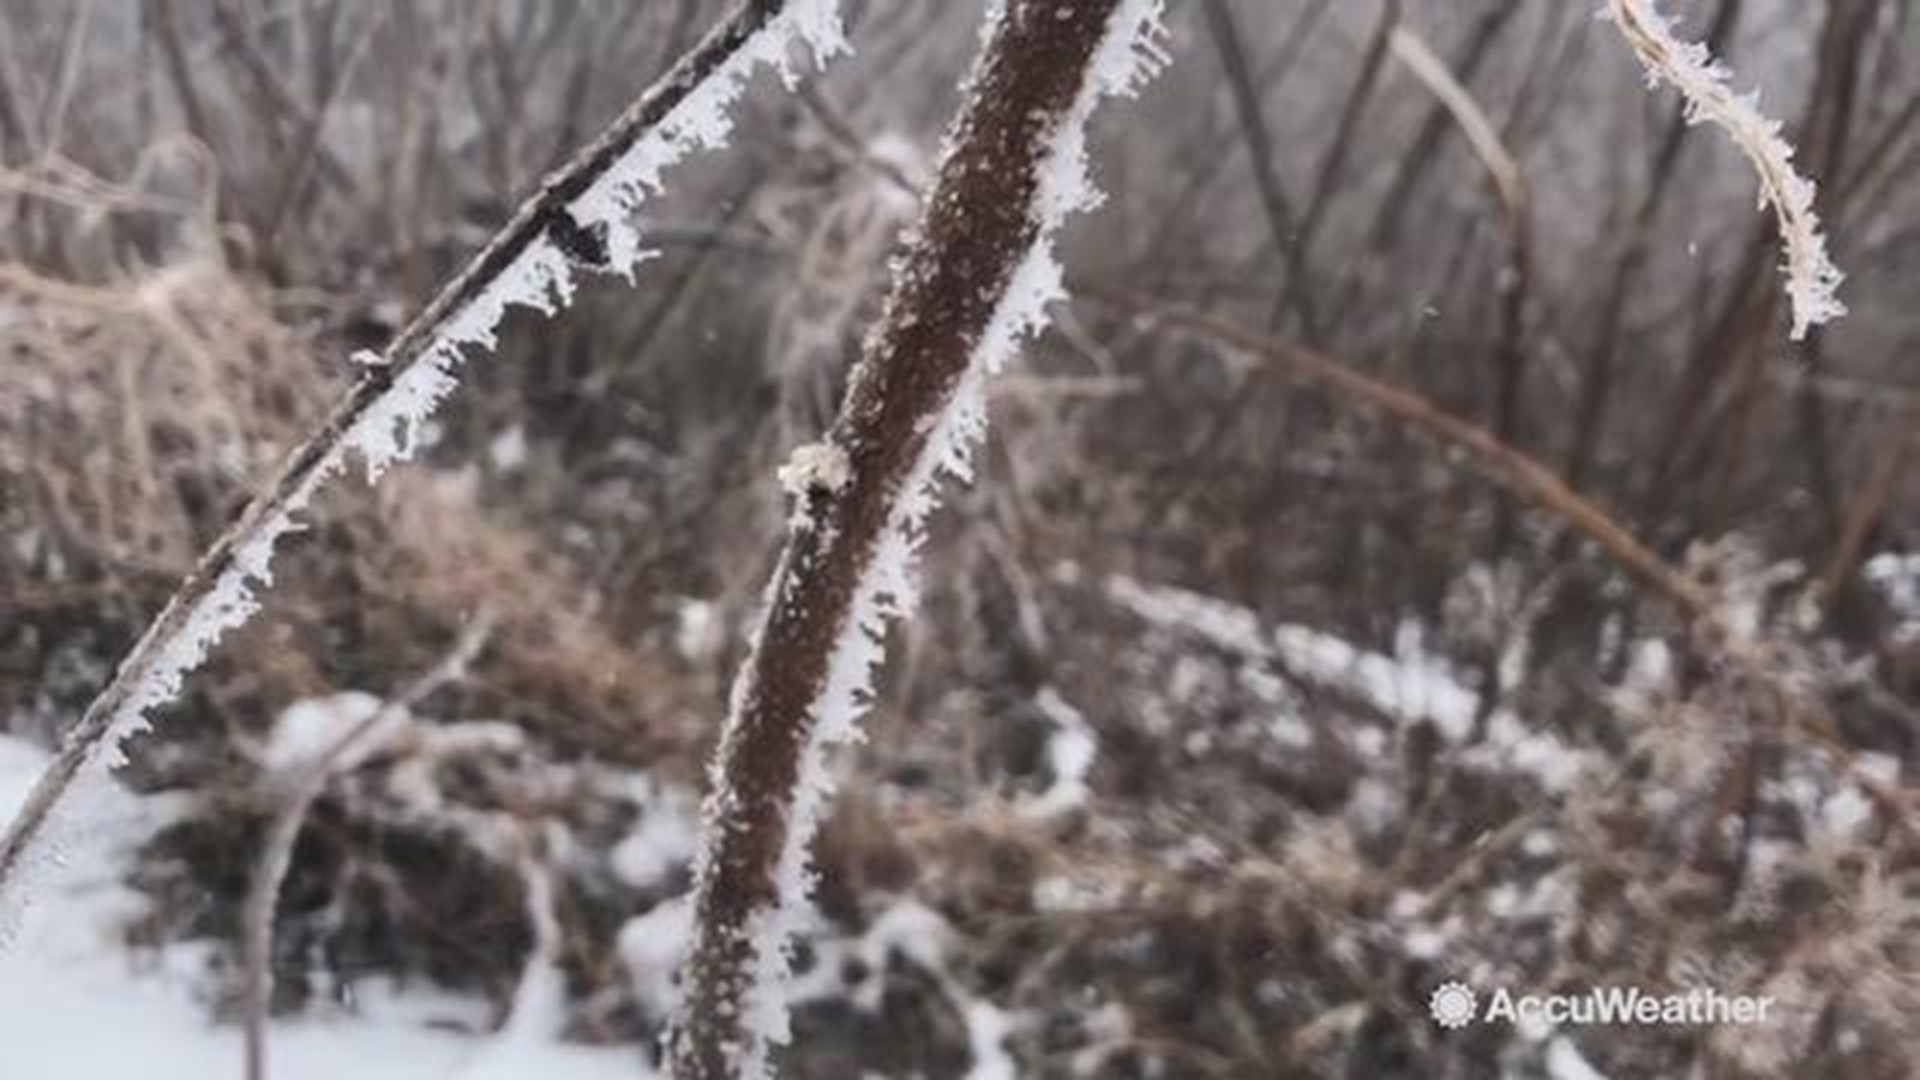 This beautiful sight of rime ice was spotted in Staunton, Virginia on Jan. 13.  It formed due to a period of freezing fog and rain.